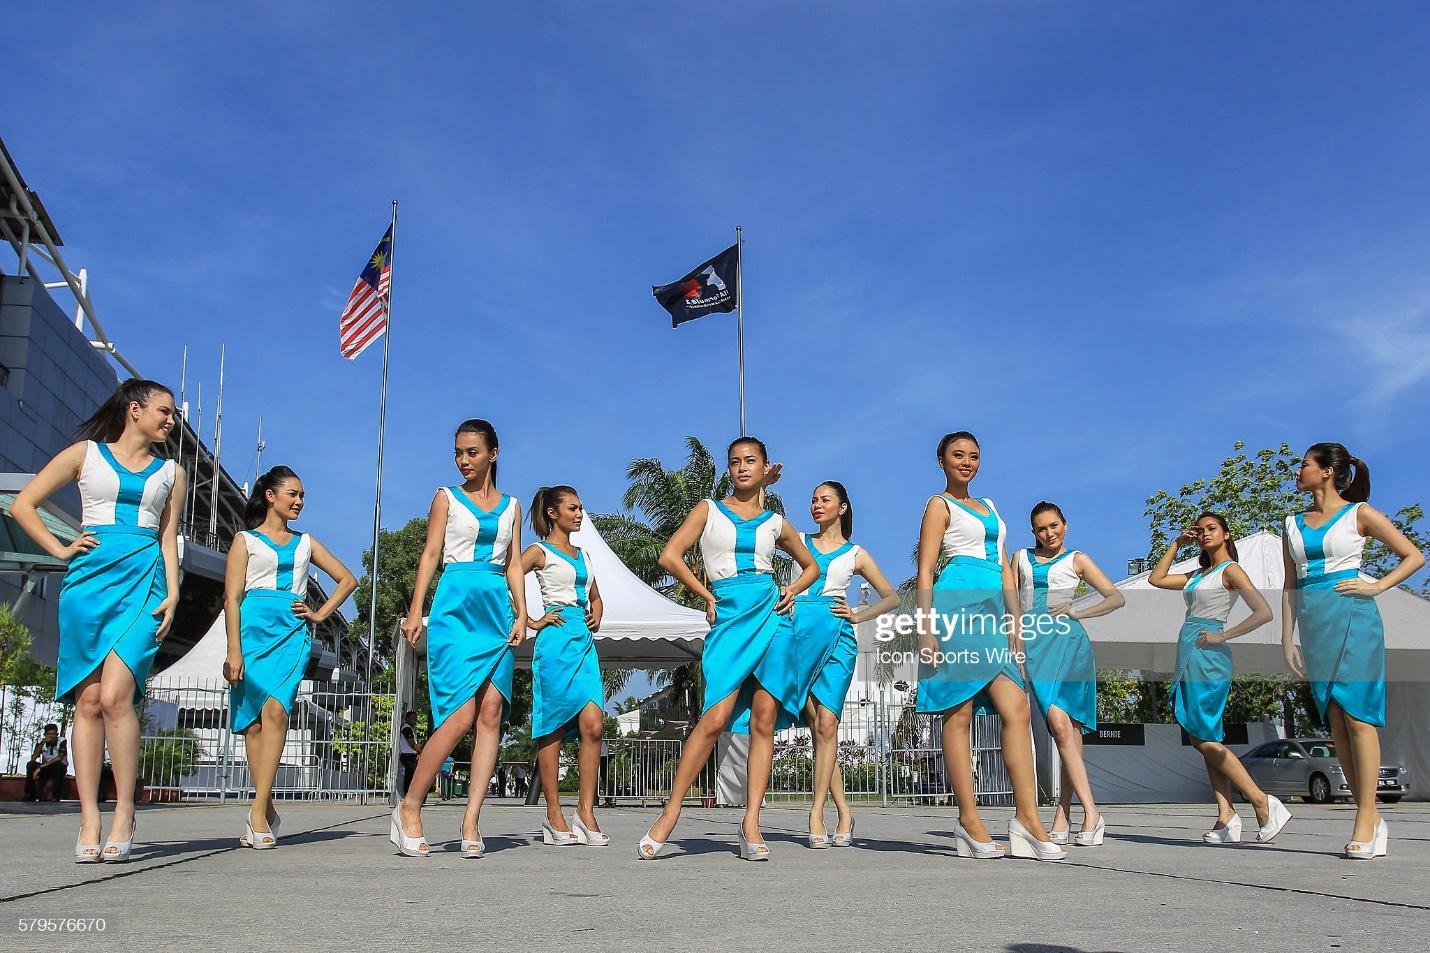 D:\Documenti\posts\posts\Women and motorsport\foto\Getty e altre\march-2015-grid-girls-pose-for-photograph-at-the-paddock-of-the-1-picture-id579576670.jpg